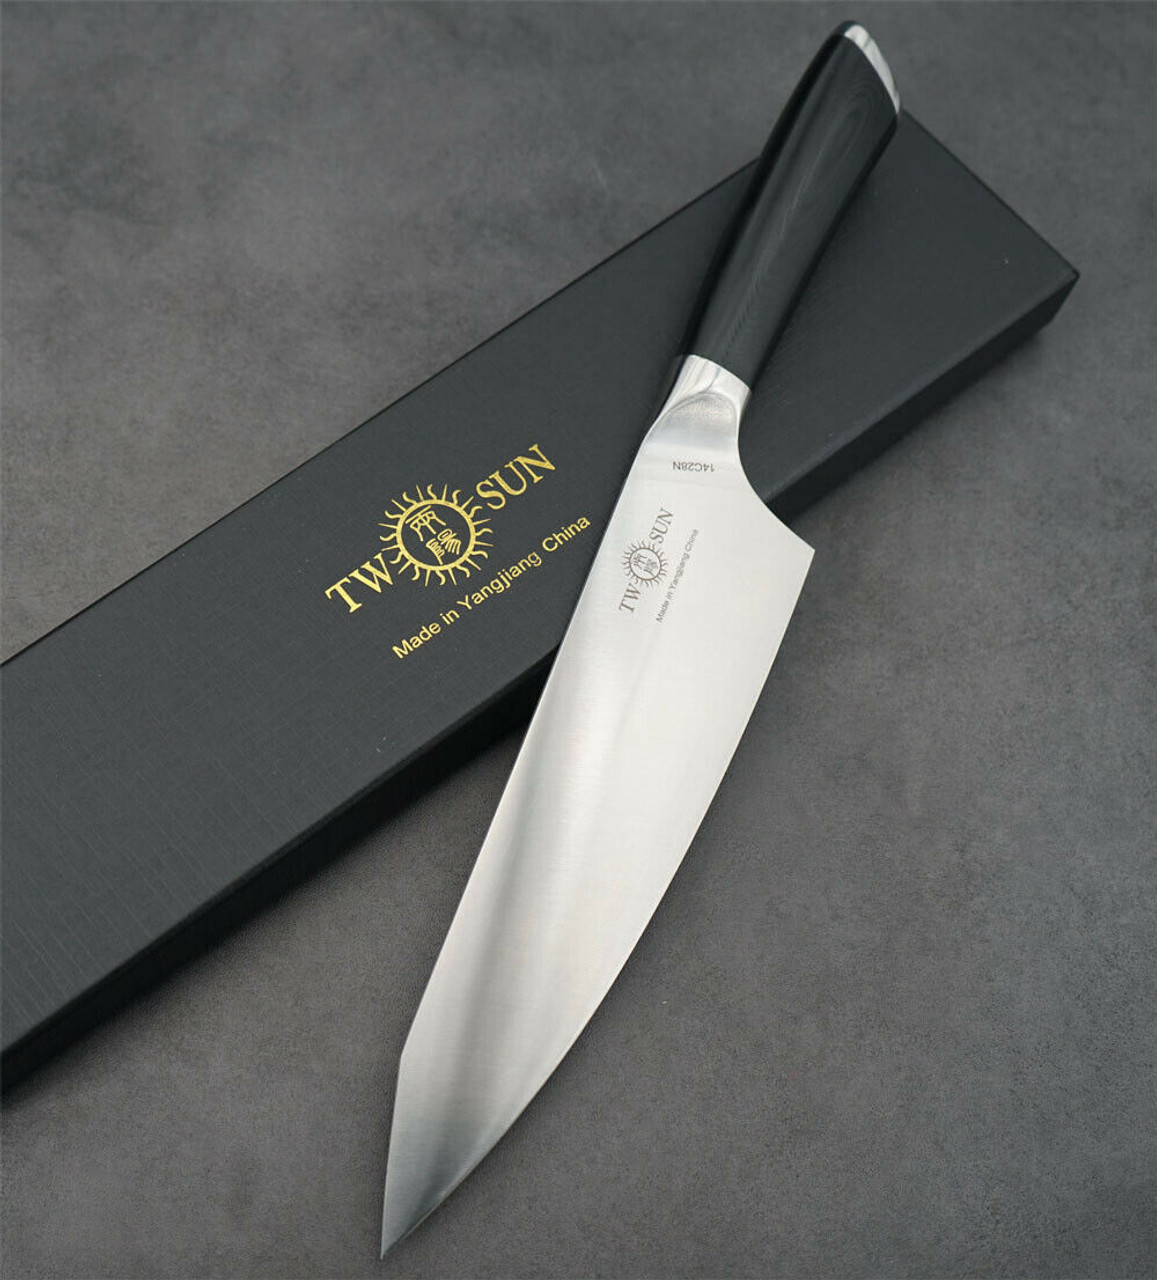 product image for Twosun TS-966 Black G10 Fixed Blade Knife